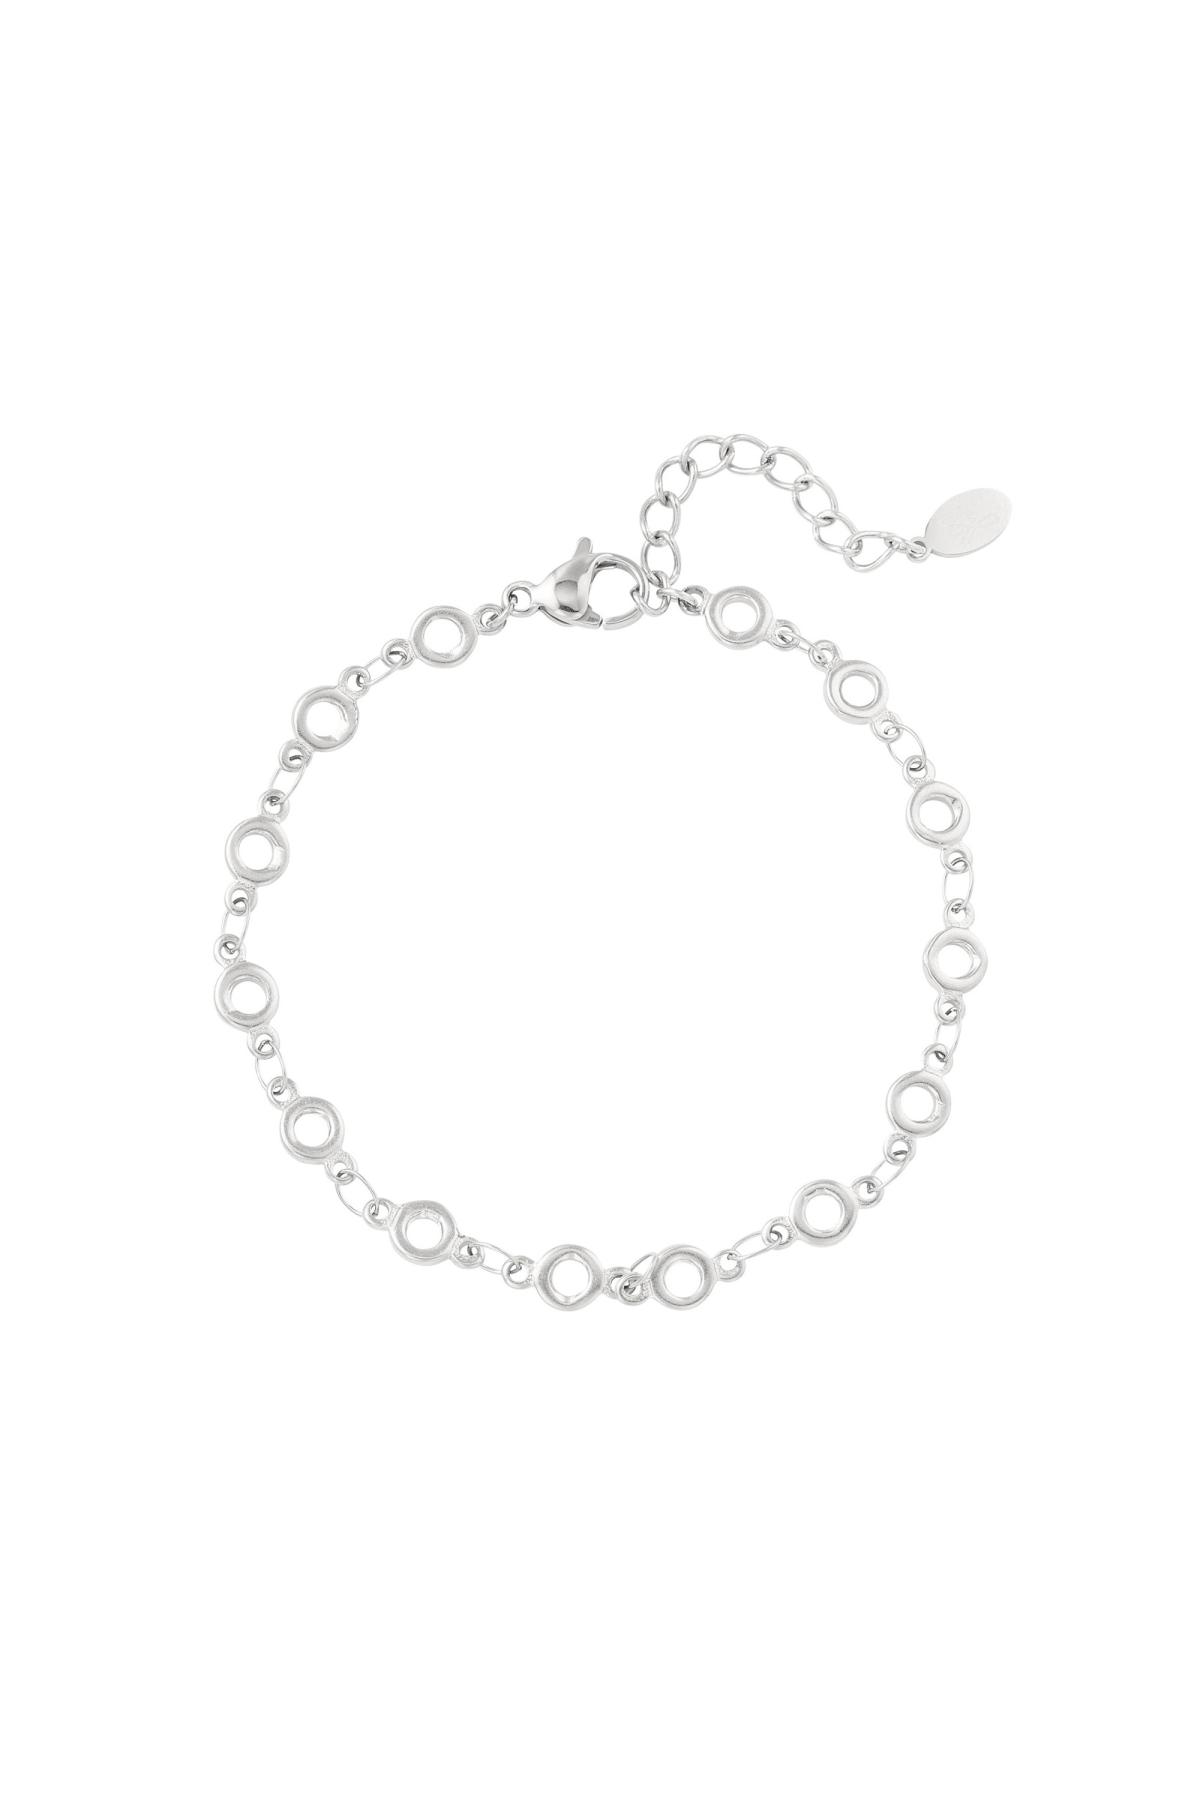 Link bracelet circles Silver Stainless Steel h5 